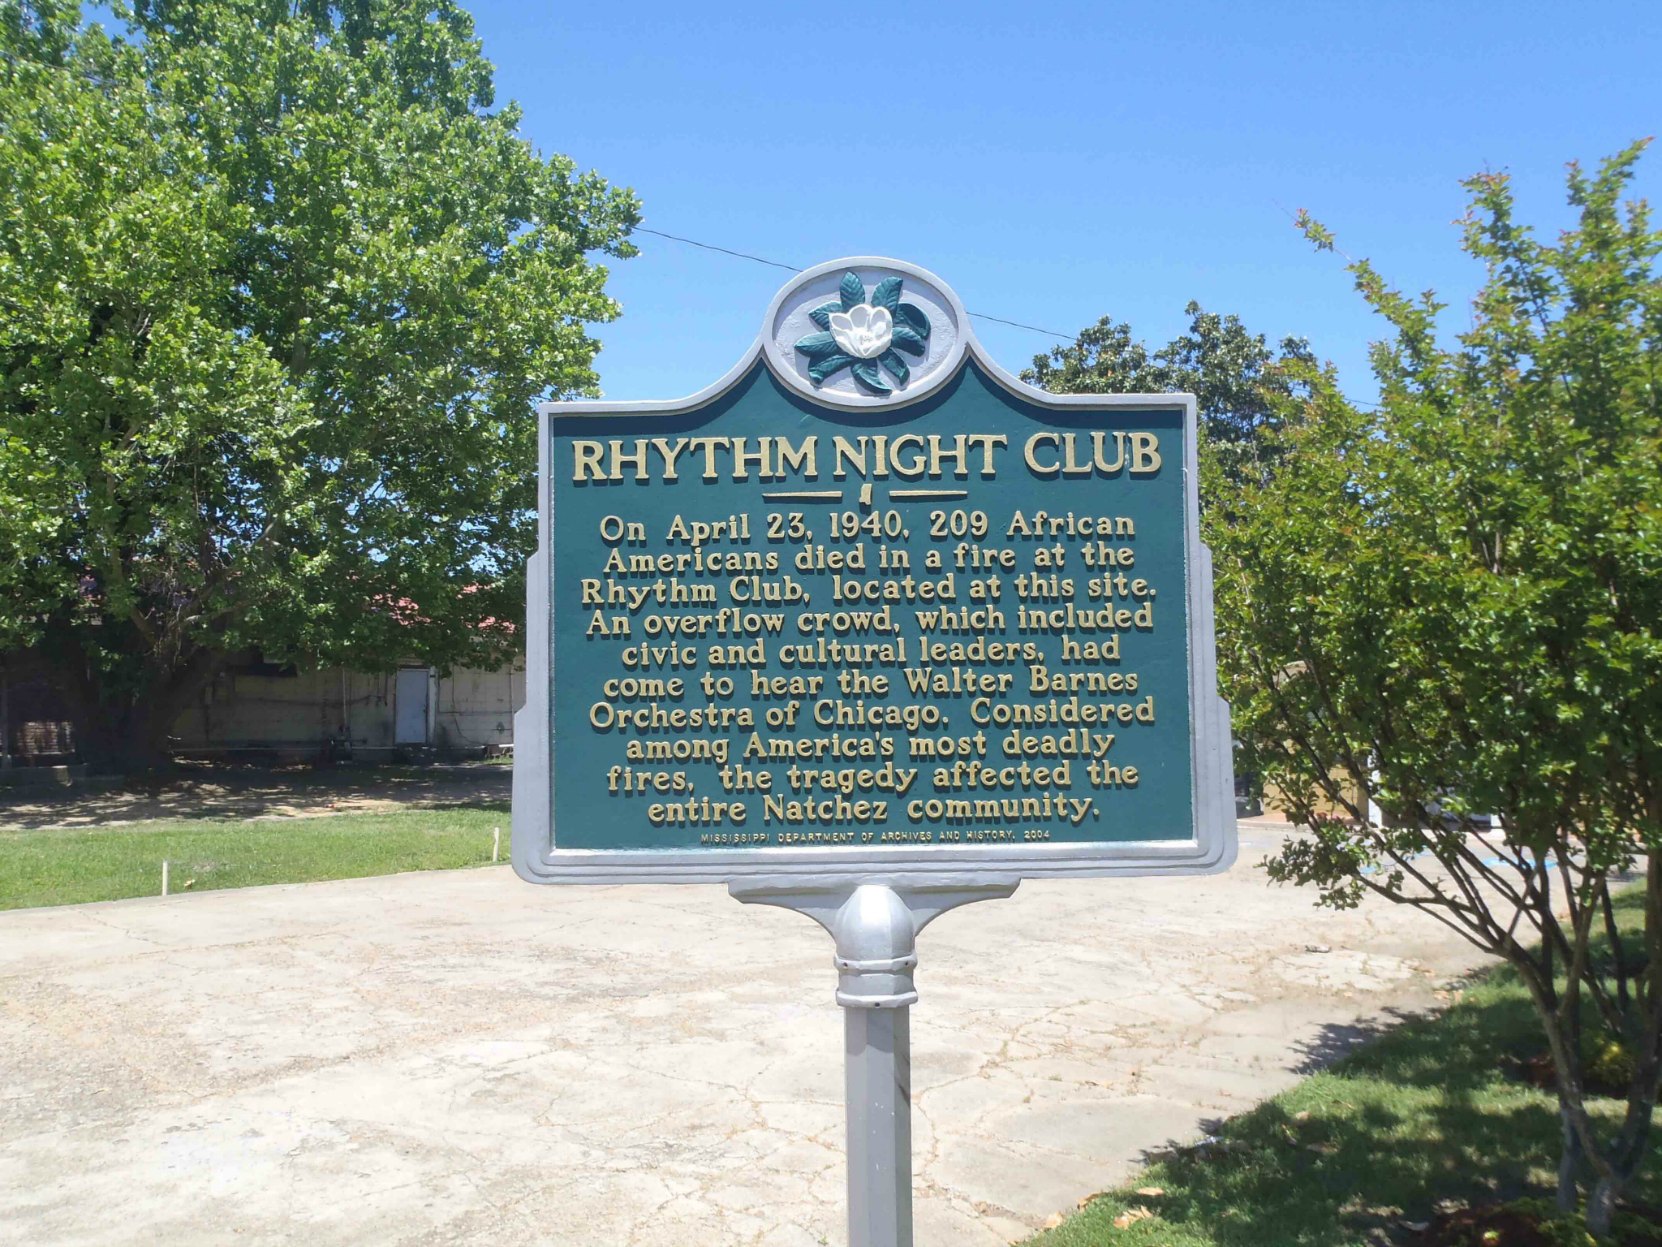 Mississippi Department of Archives & History marker for Rhythm Night Club Fire, Natchez, Mississippi